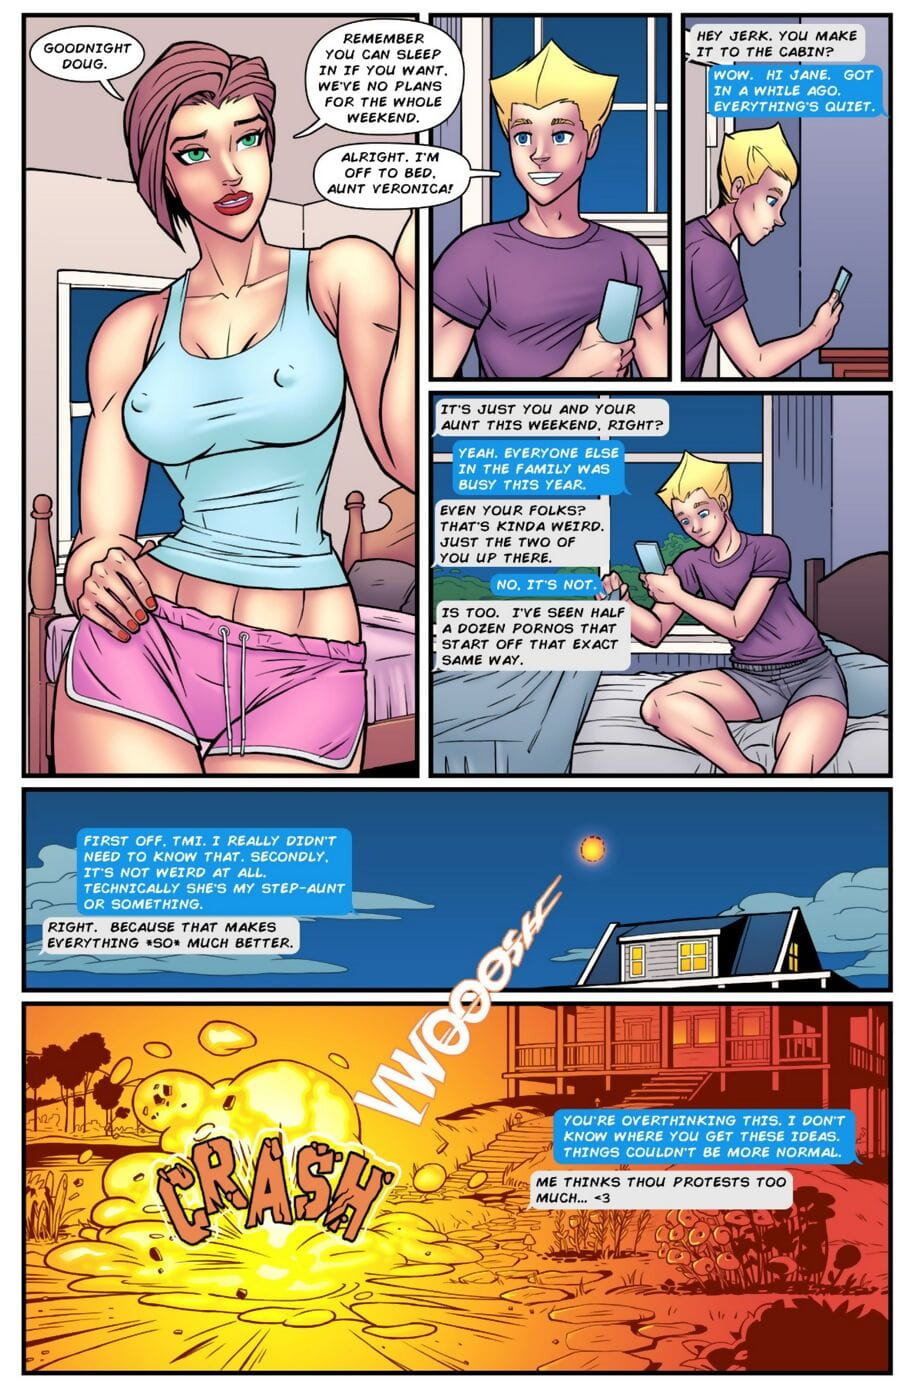 Bot- Going Green Issue 1 page 1